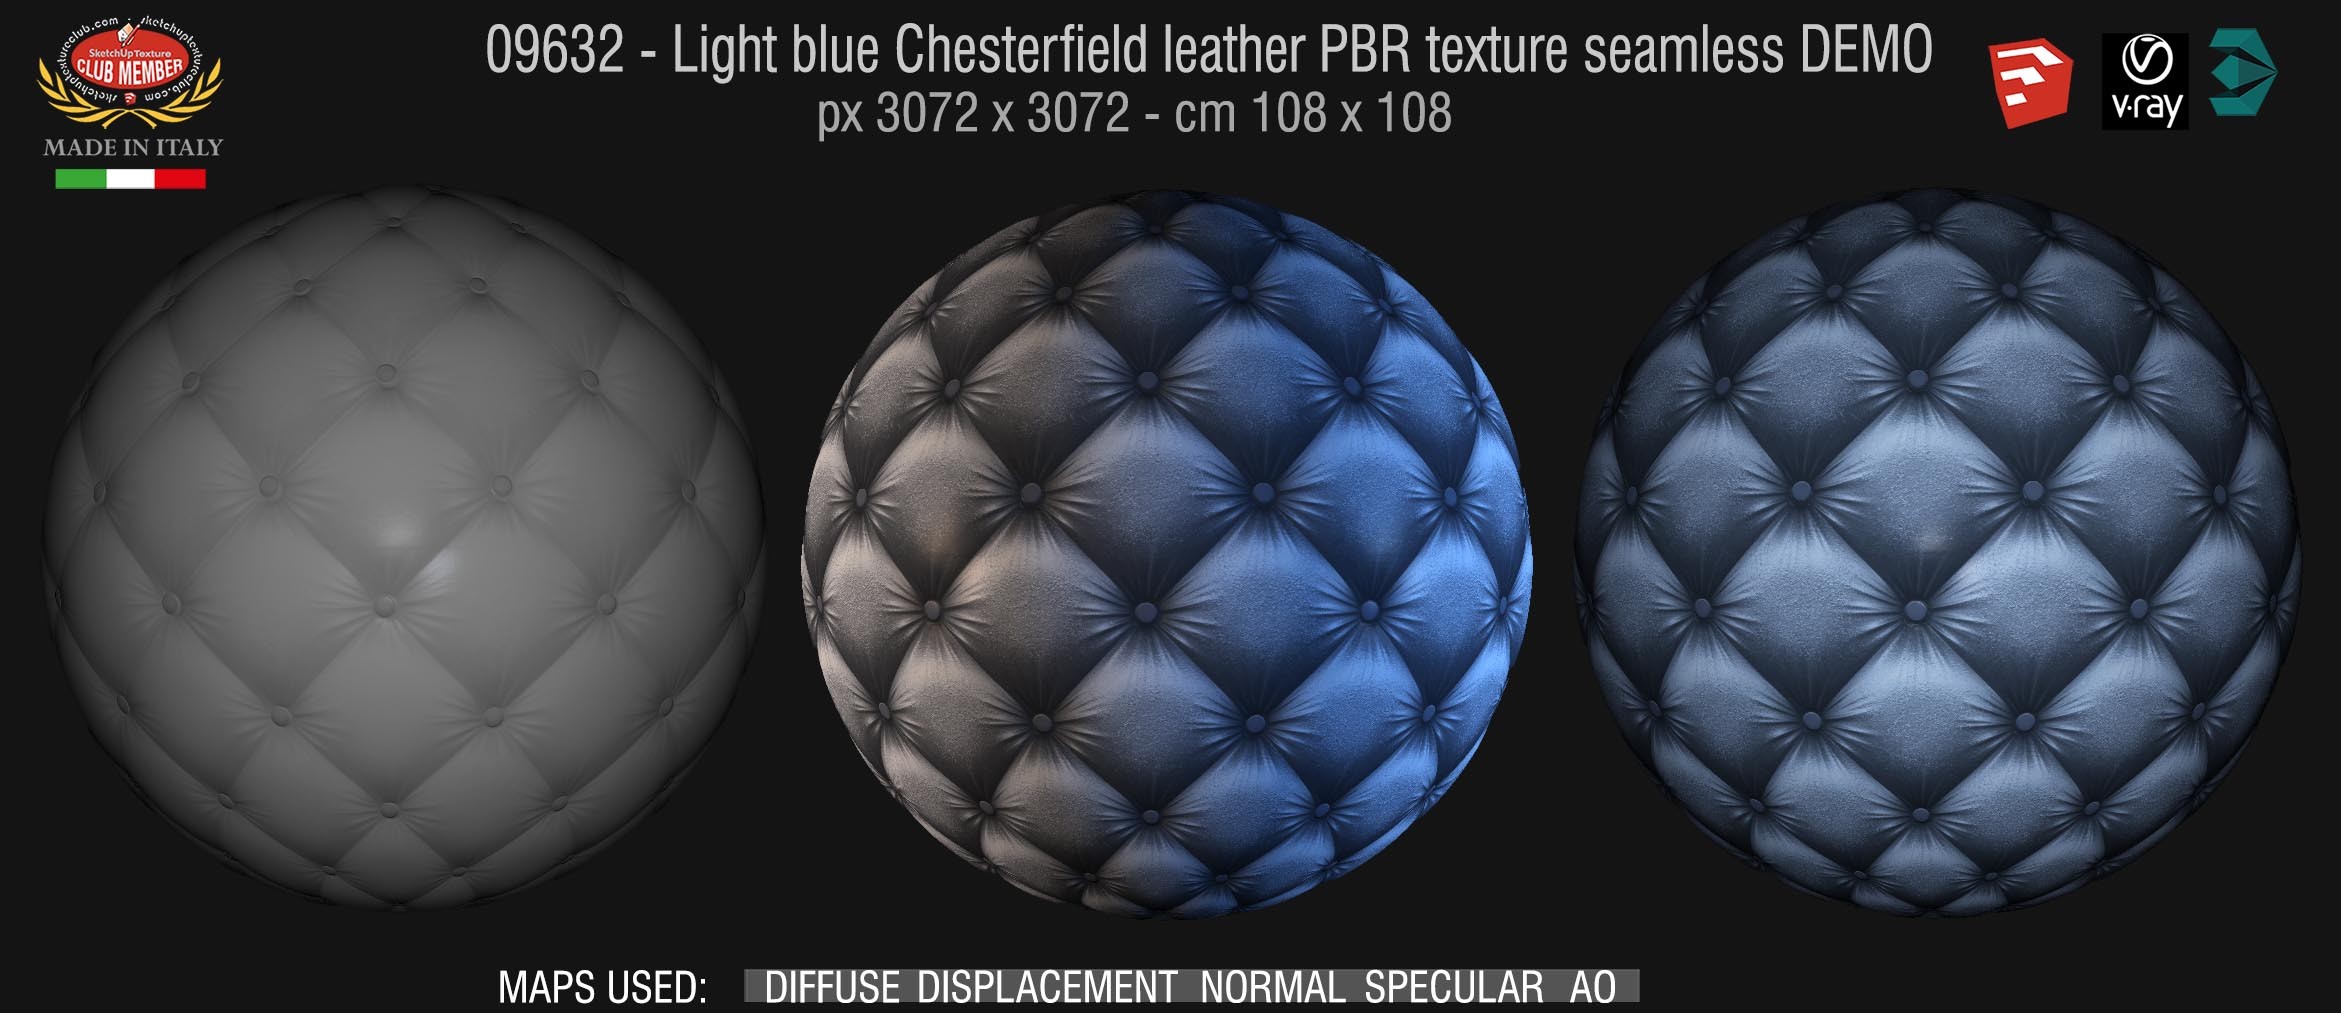 09632 Light blue Chesterfield leather PBR texture seamless DEMO